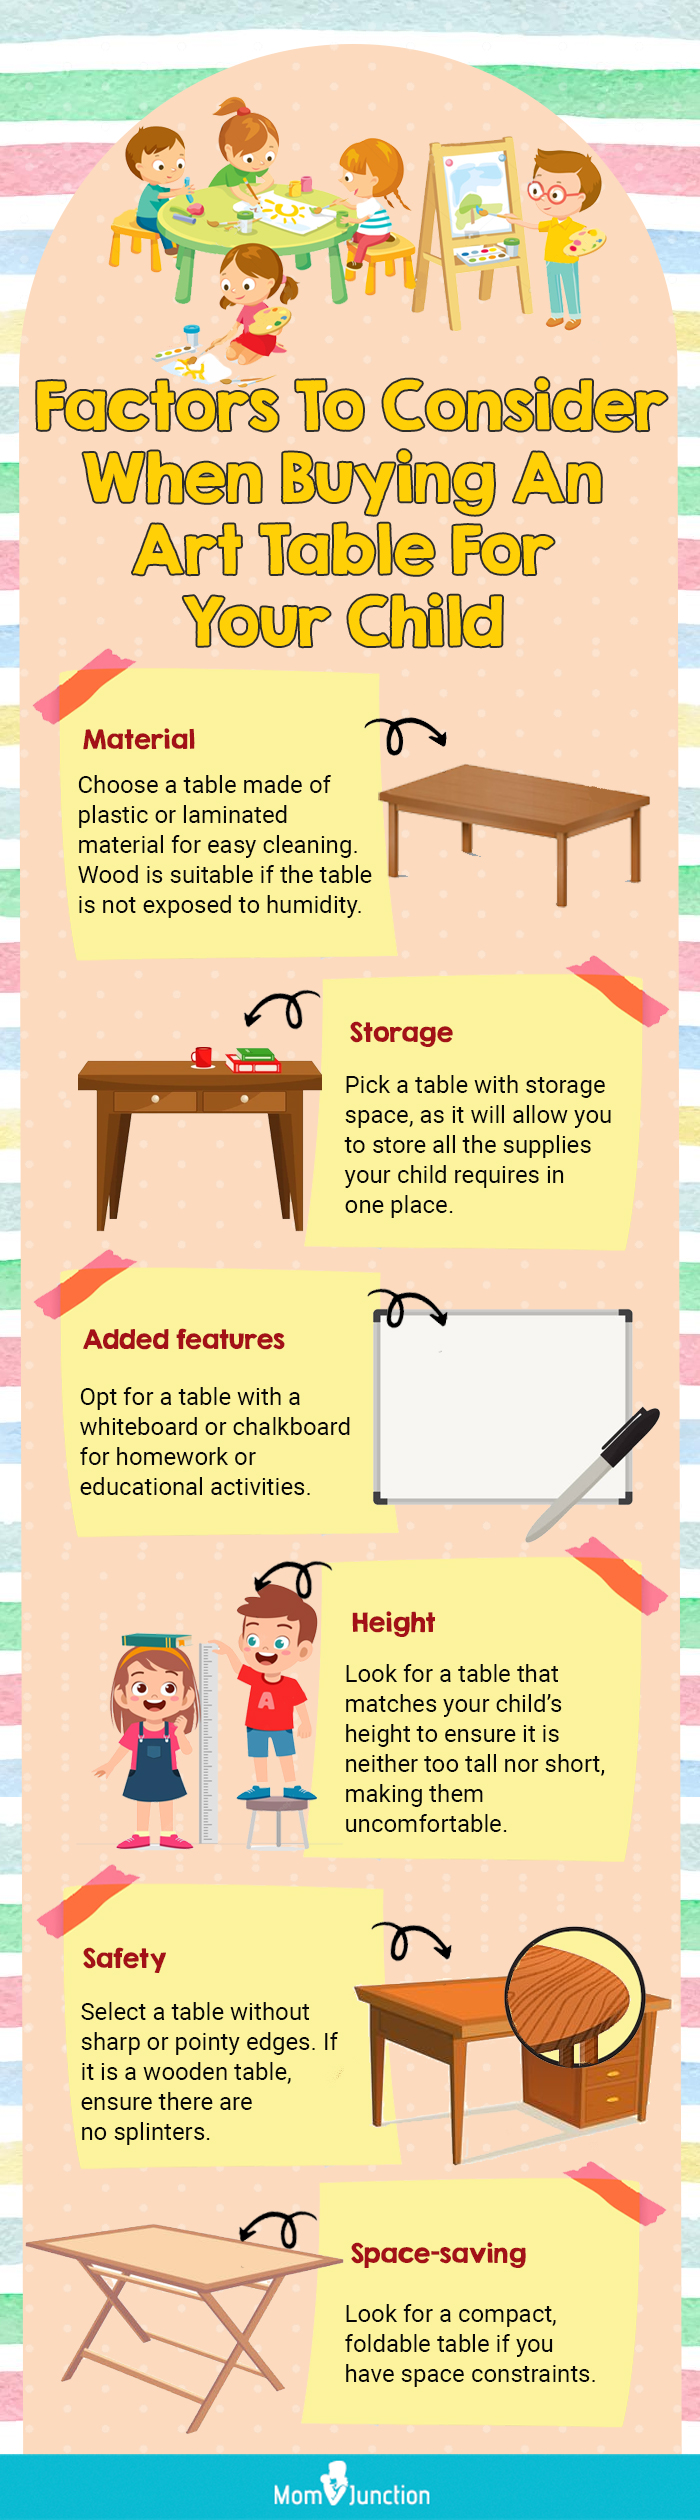 https://cdn2.momjunction.com/wp-content/uploads/2020/05/Infographic-A-Buying-Guide-To-Find-The-Right-Art-Table-For-Your-Child.jpg